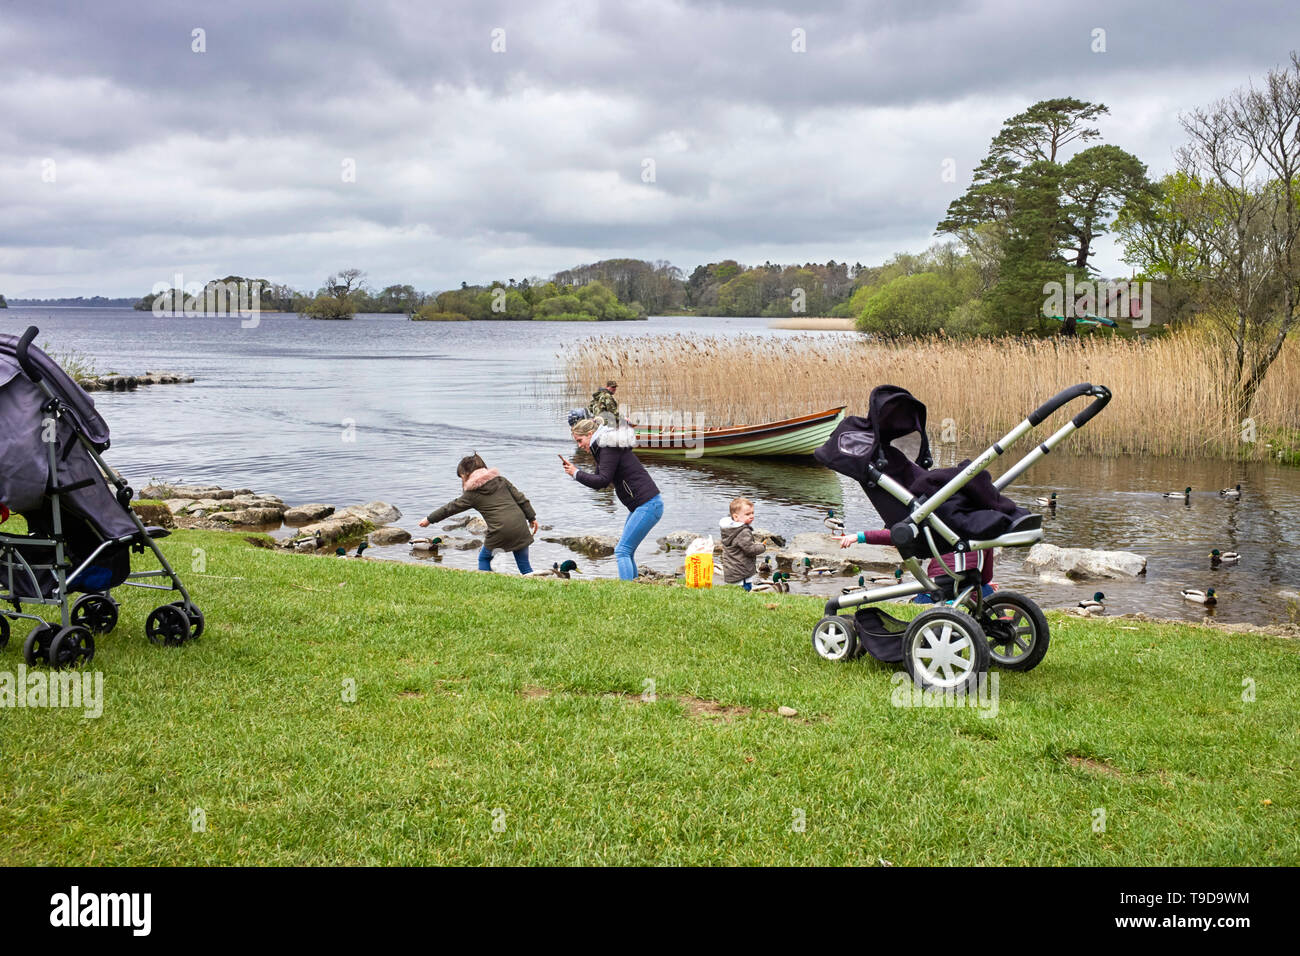 A fisherman in a boat passing young mothers and children feeding ducks in Lough Leane, Killarney, Ireland Stock Photo